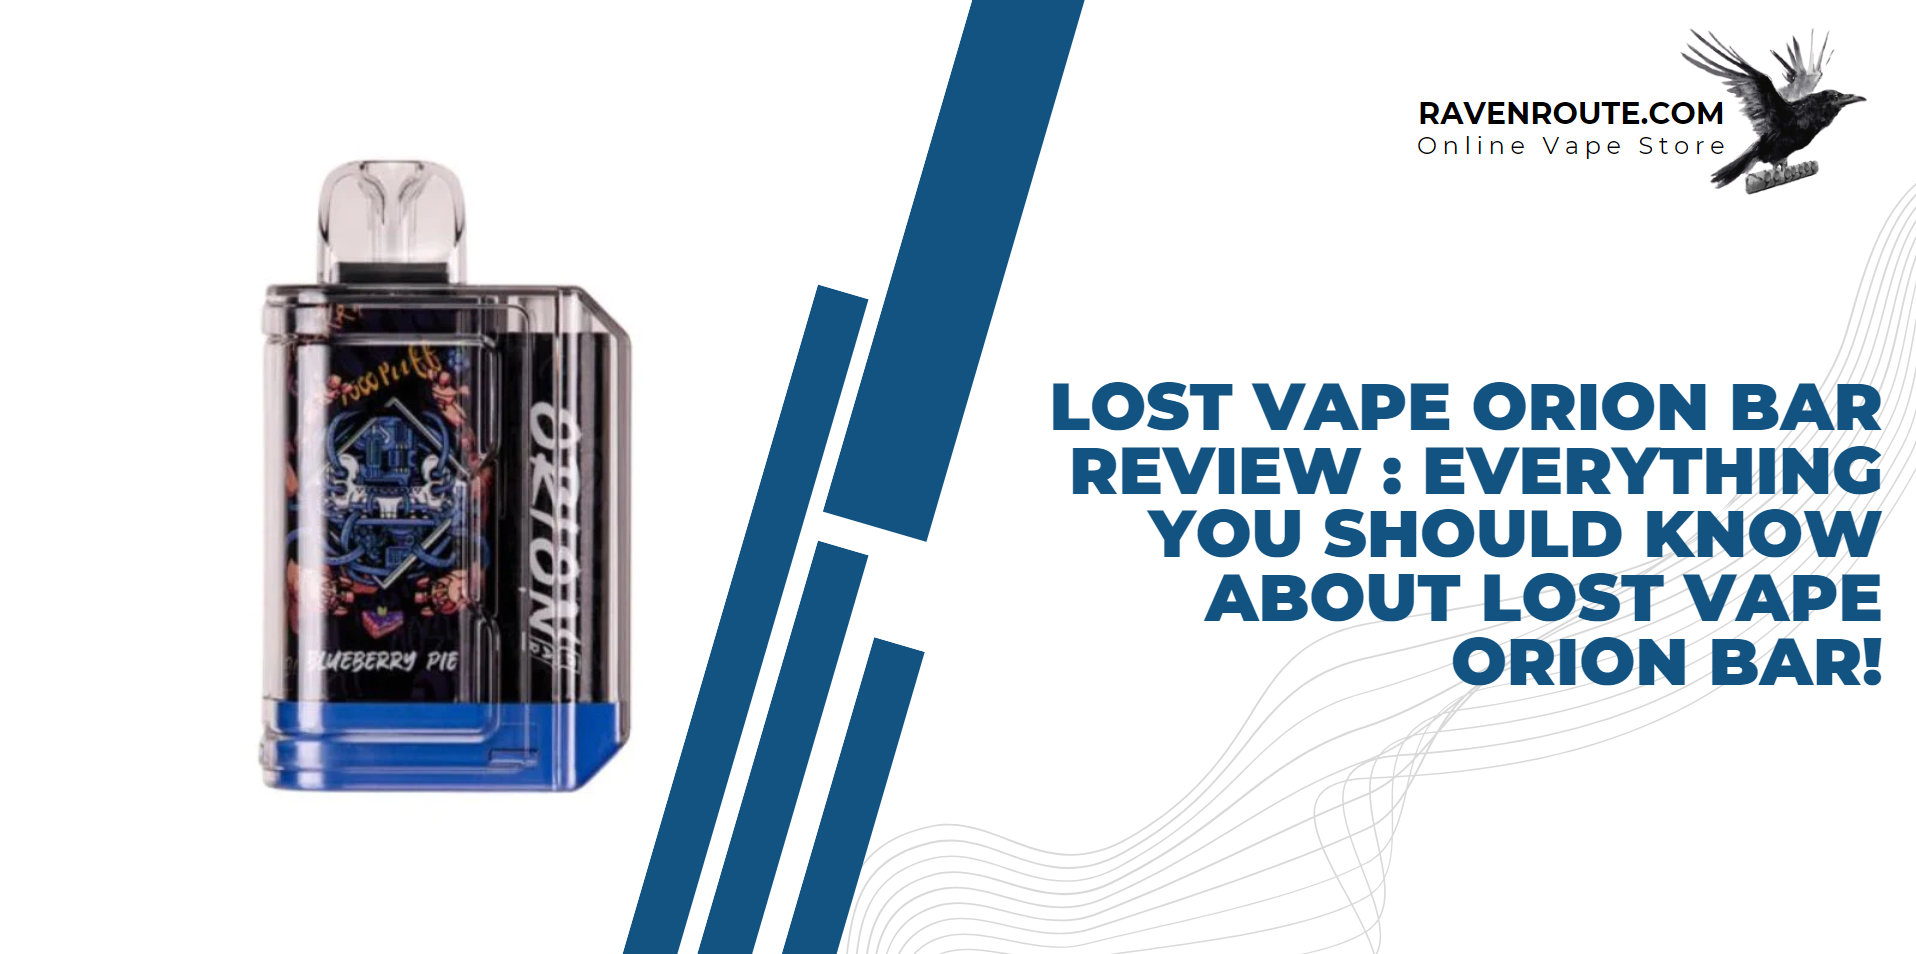 Lost Vape Orion Bar Review : All About Lost Vape Orion Bar 7500